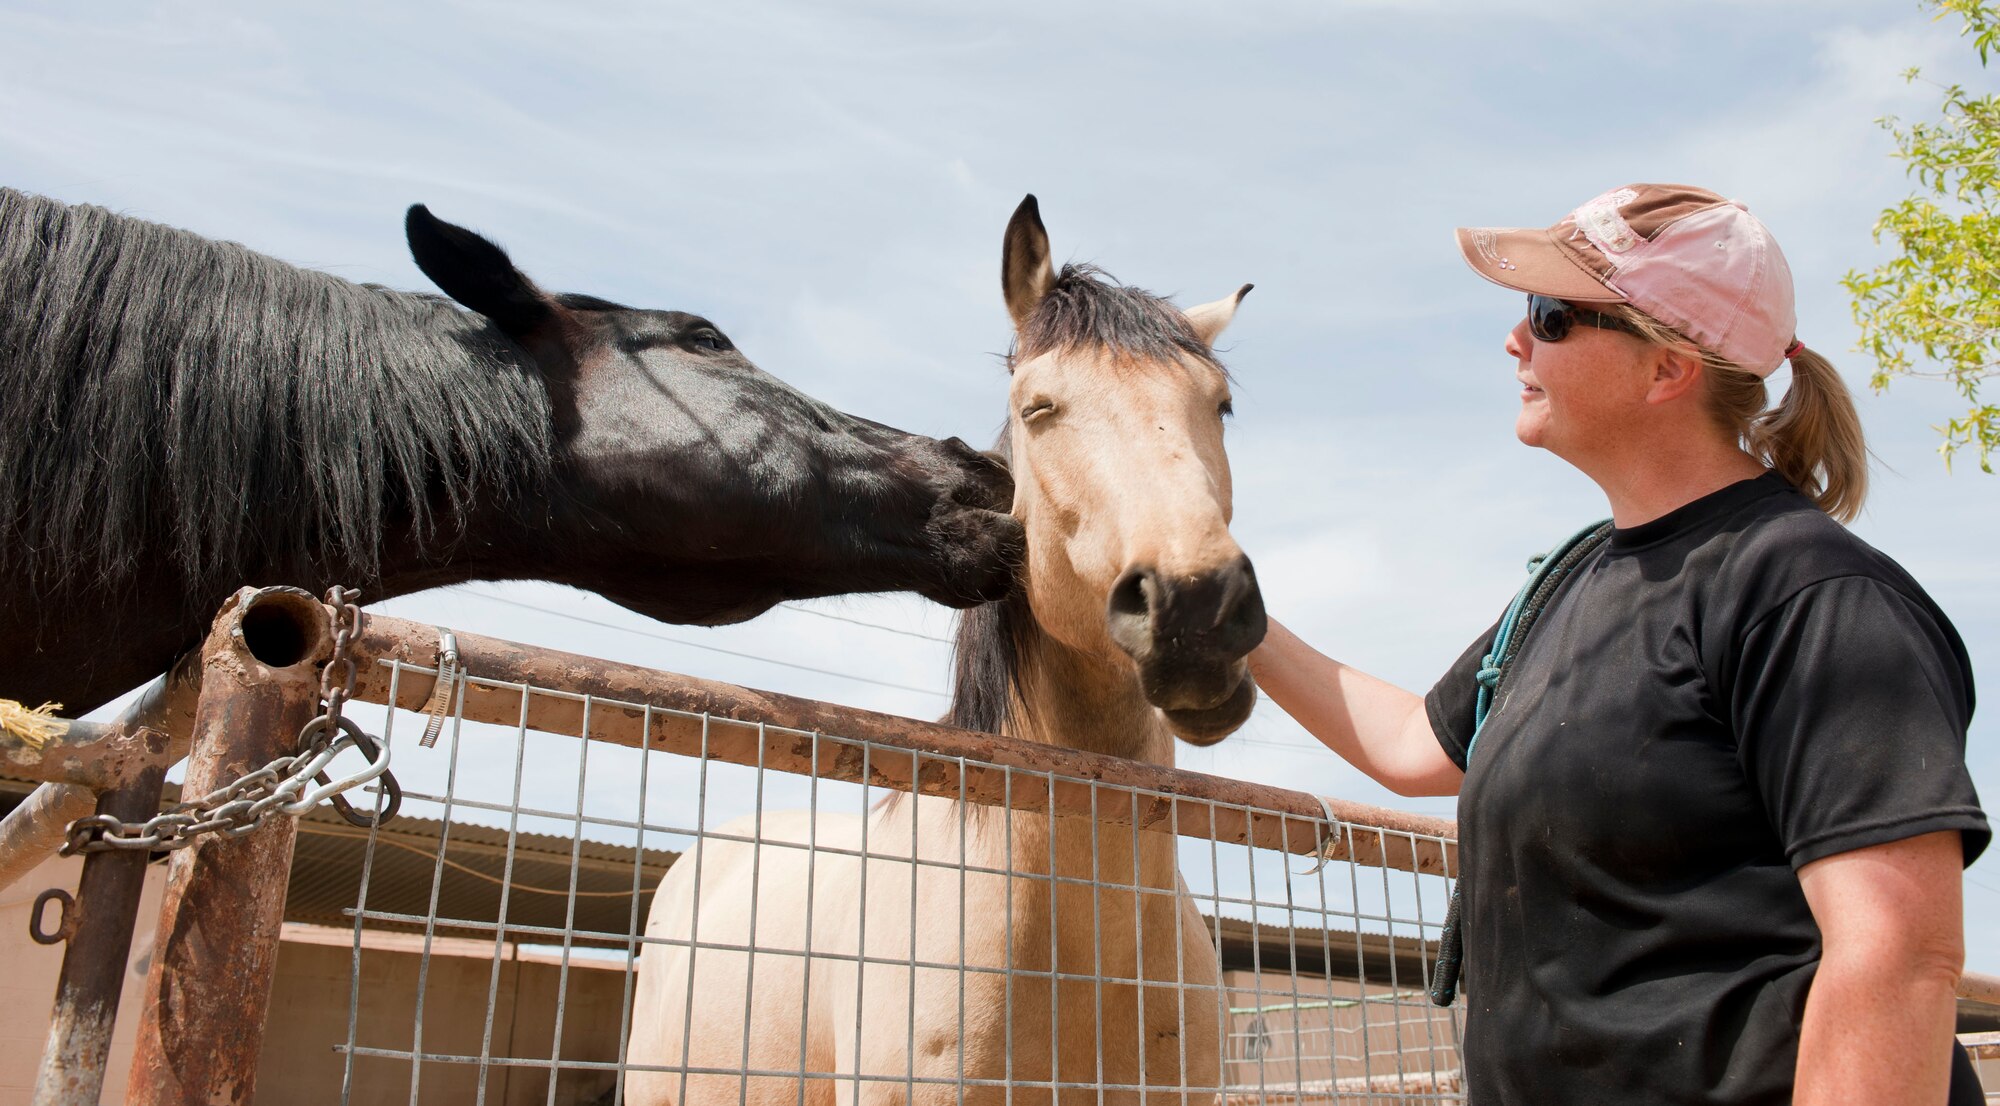 Chanel Jernigan, wife of retired Master Sgt. Stacy Jernigan, watches as her horses Zuli, left, and Zeb play with one another at the stables on Nellis Air Force Base, Nev., May 6, 2015. Jernigan rides her horses recreationally on trails. (U.S. Air Force photo by Airman 1st Class Mikaley Towle)